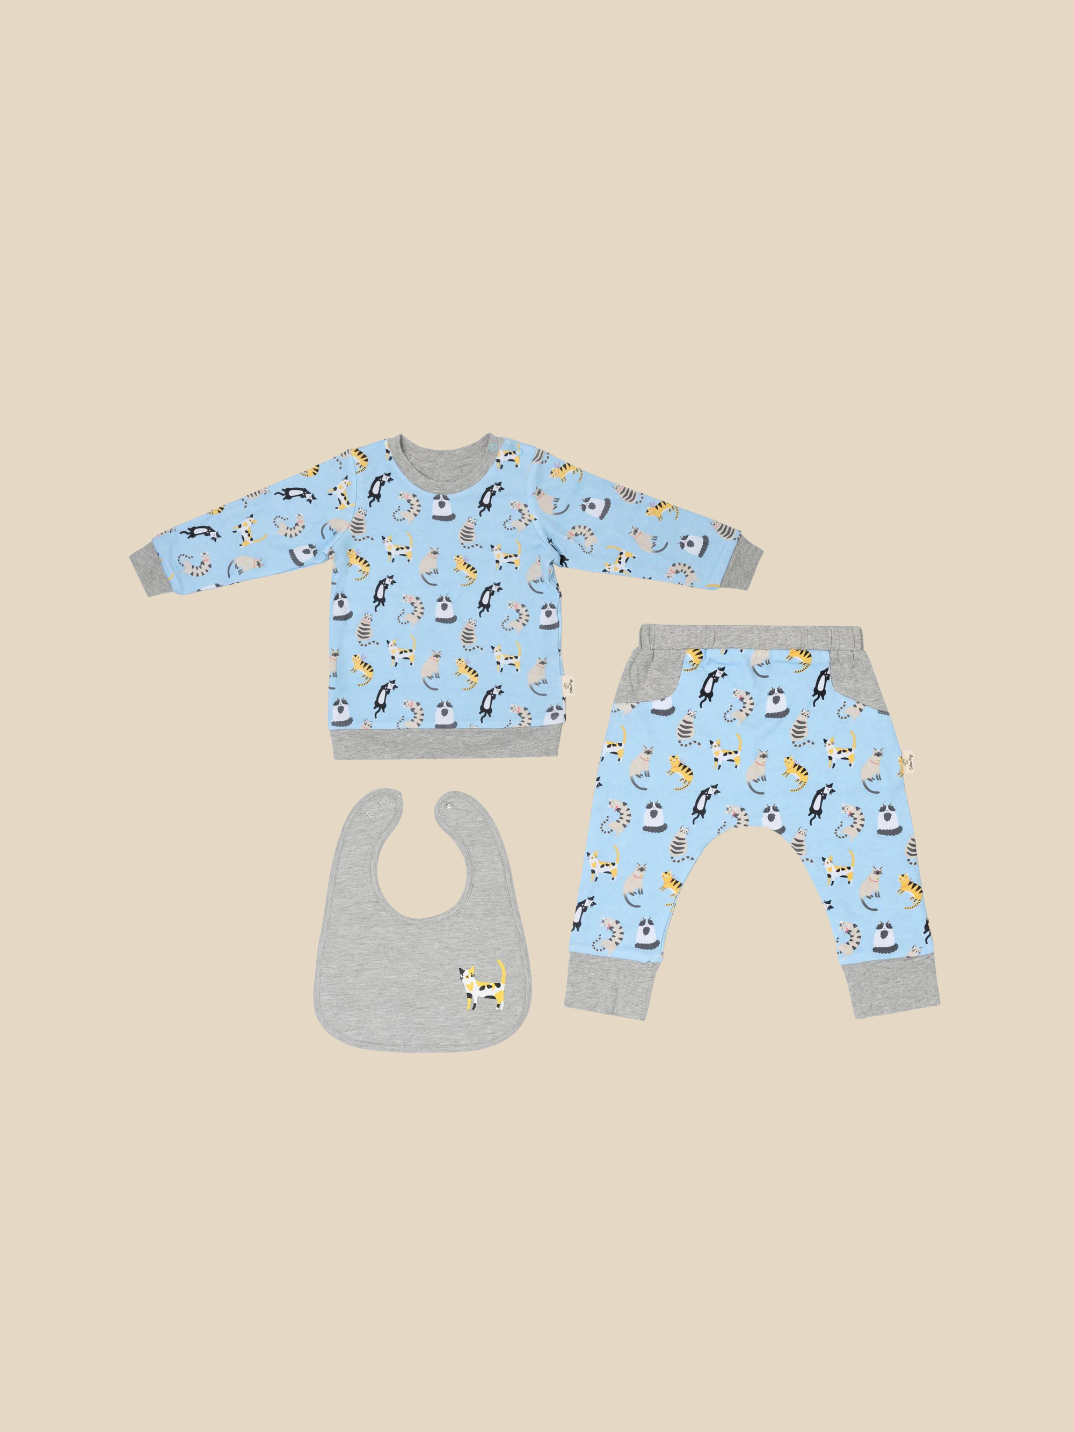 This happy little reversible playtime jumper with matching pants and bib set will put a smile on your face and brighten the day for any baby. Whether you're a dog or cat person, there is one for everyone! 